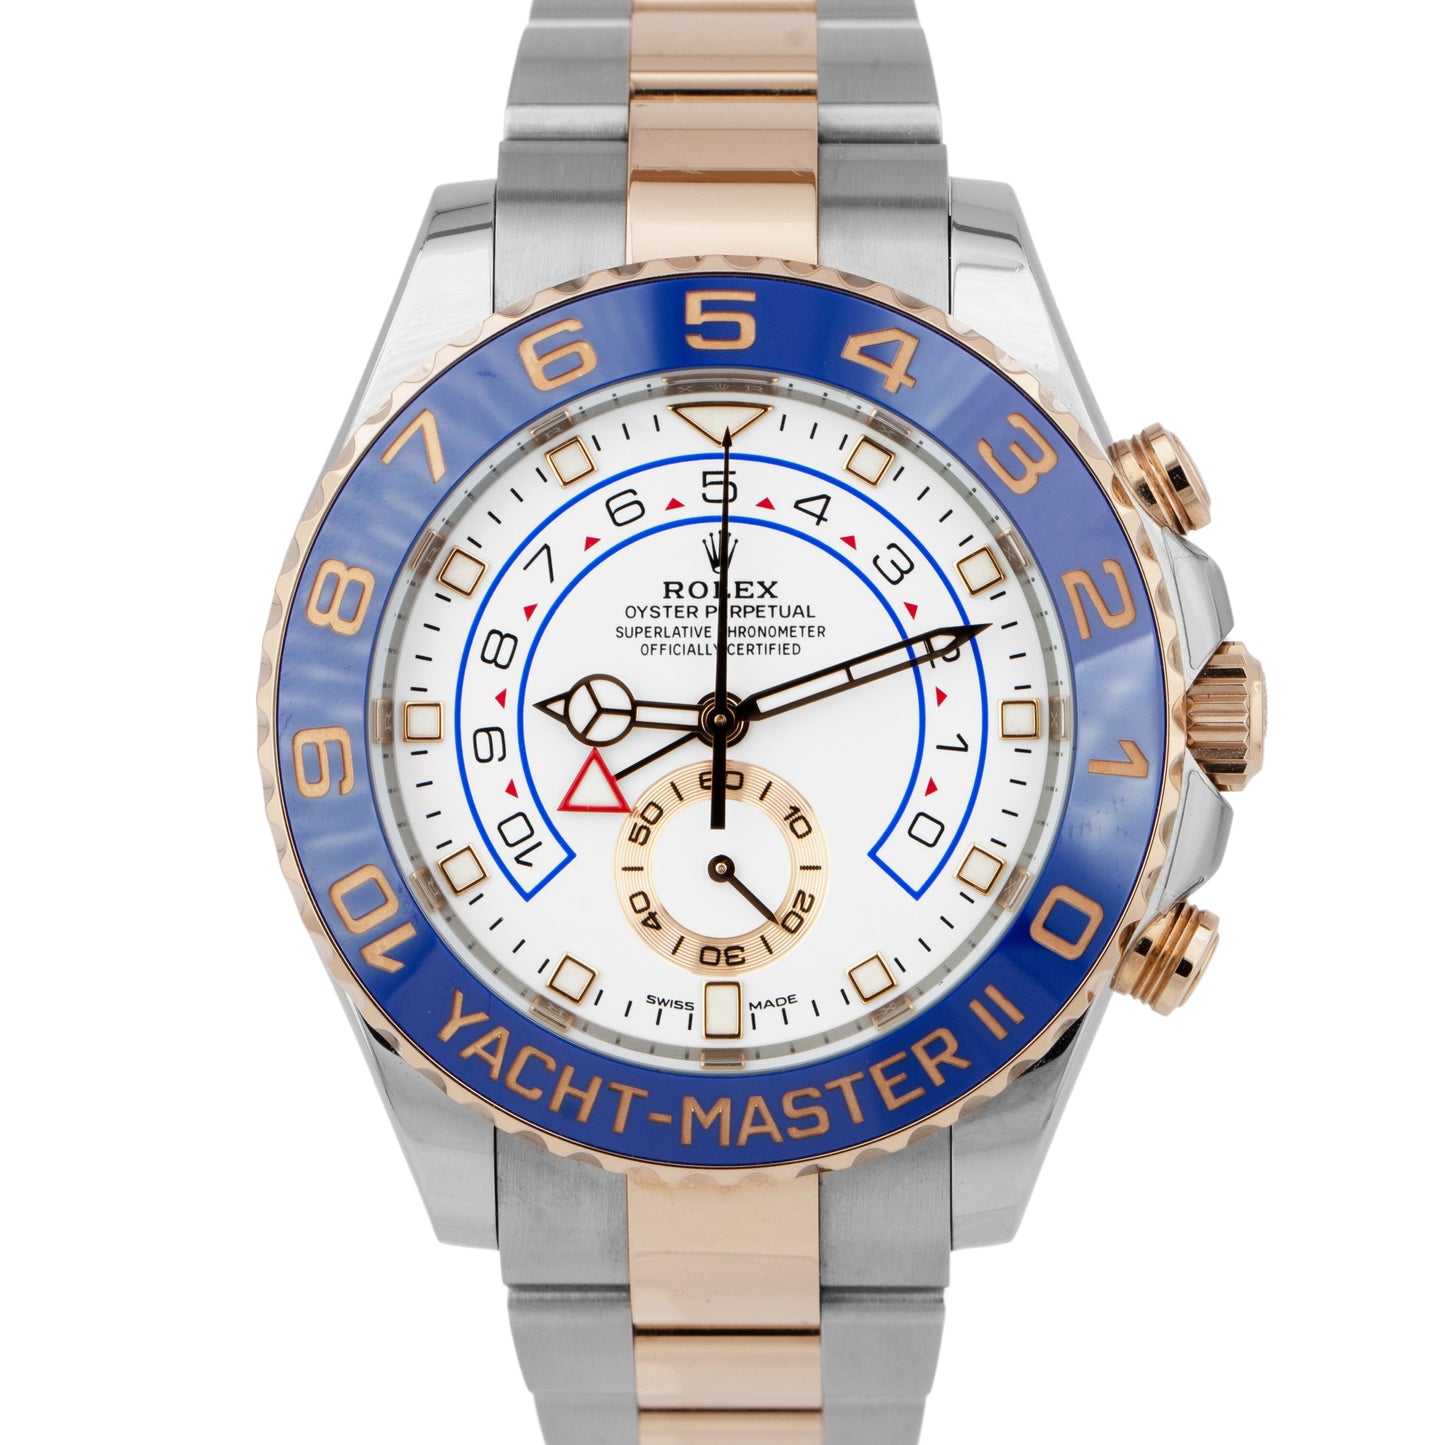 2019 Rolex Yacht-Master II White Two-Tone Rose Gold Steel 116681 44mm Watch CARD